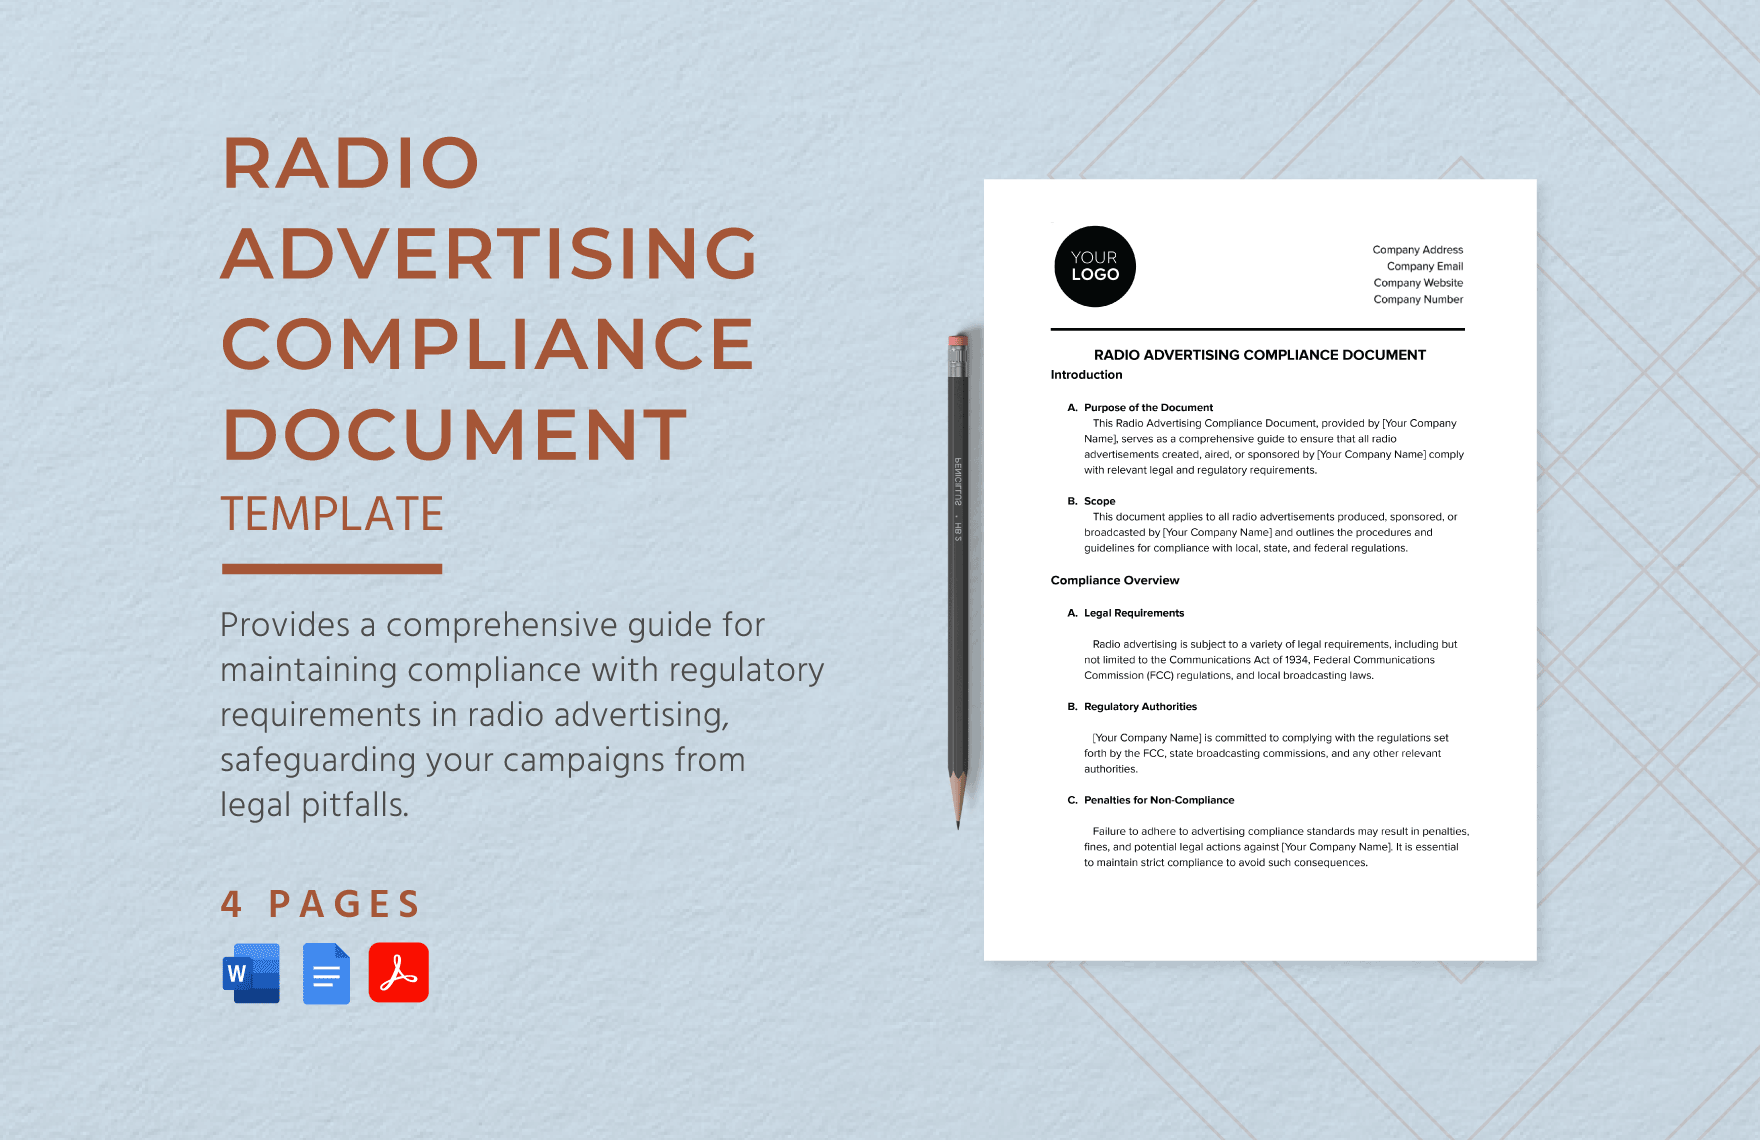 Radio Advertising Compliance Document Template in Word, Google Docs, PDF